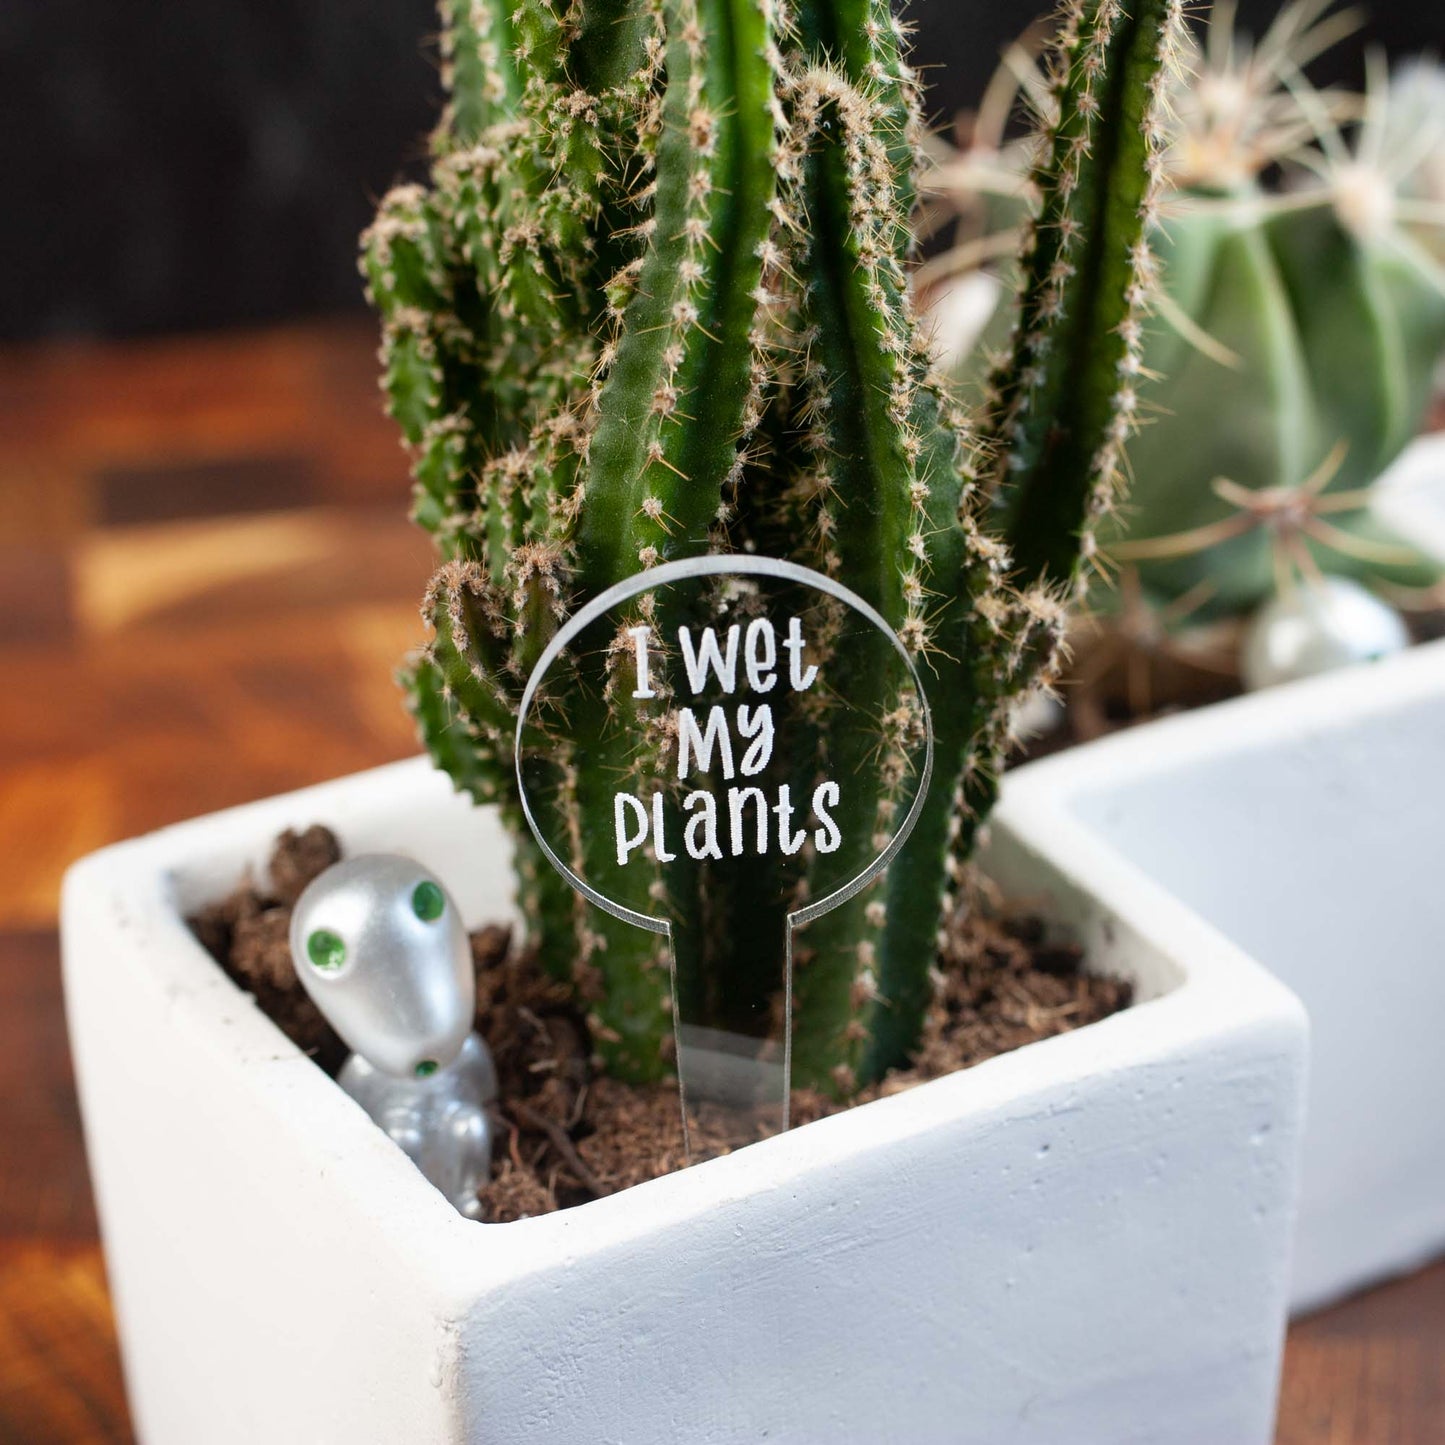 Funny Plant Markers - Laser Cut & Laser Engraved Clear Acrylic - "I Wet My Plants" - by LeeMo Designs in Bend, Oregon